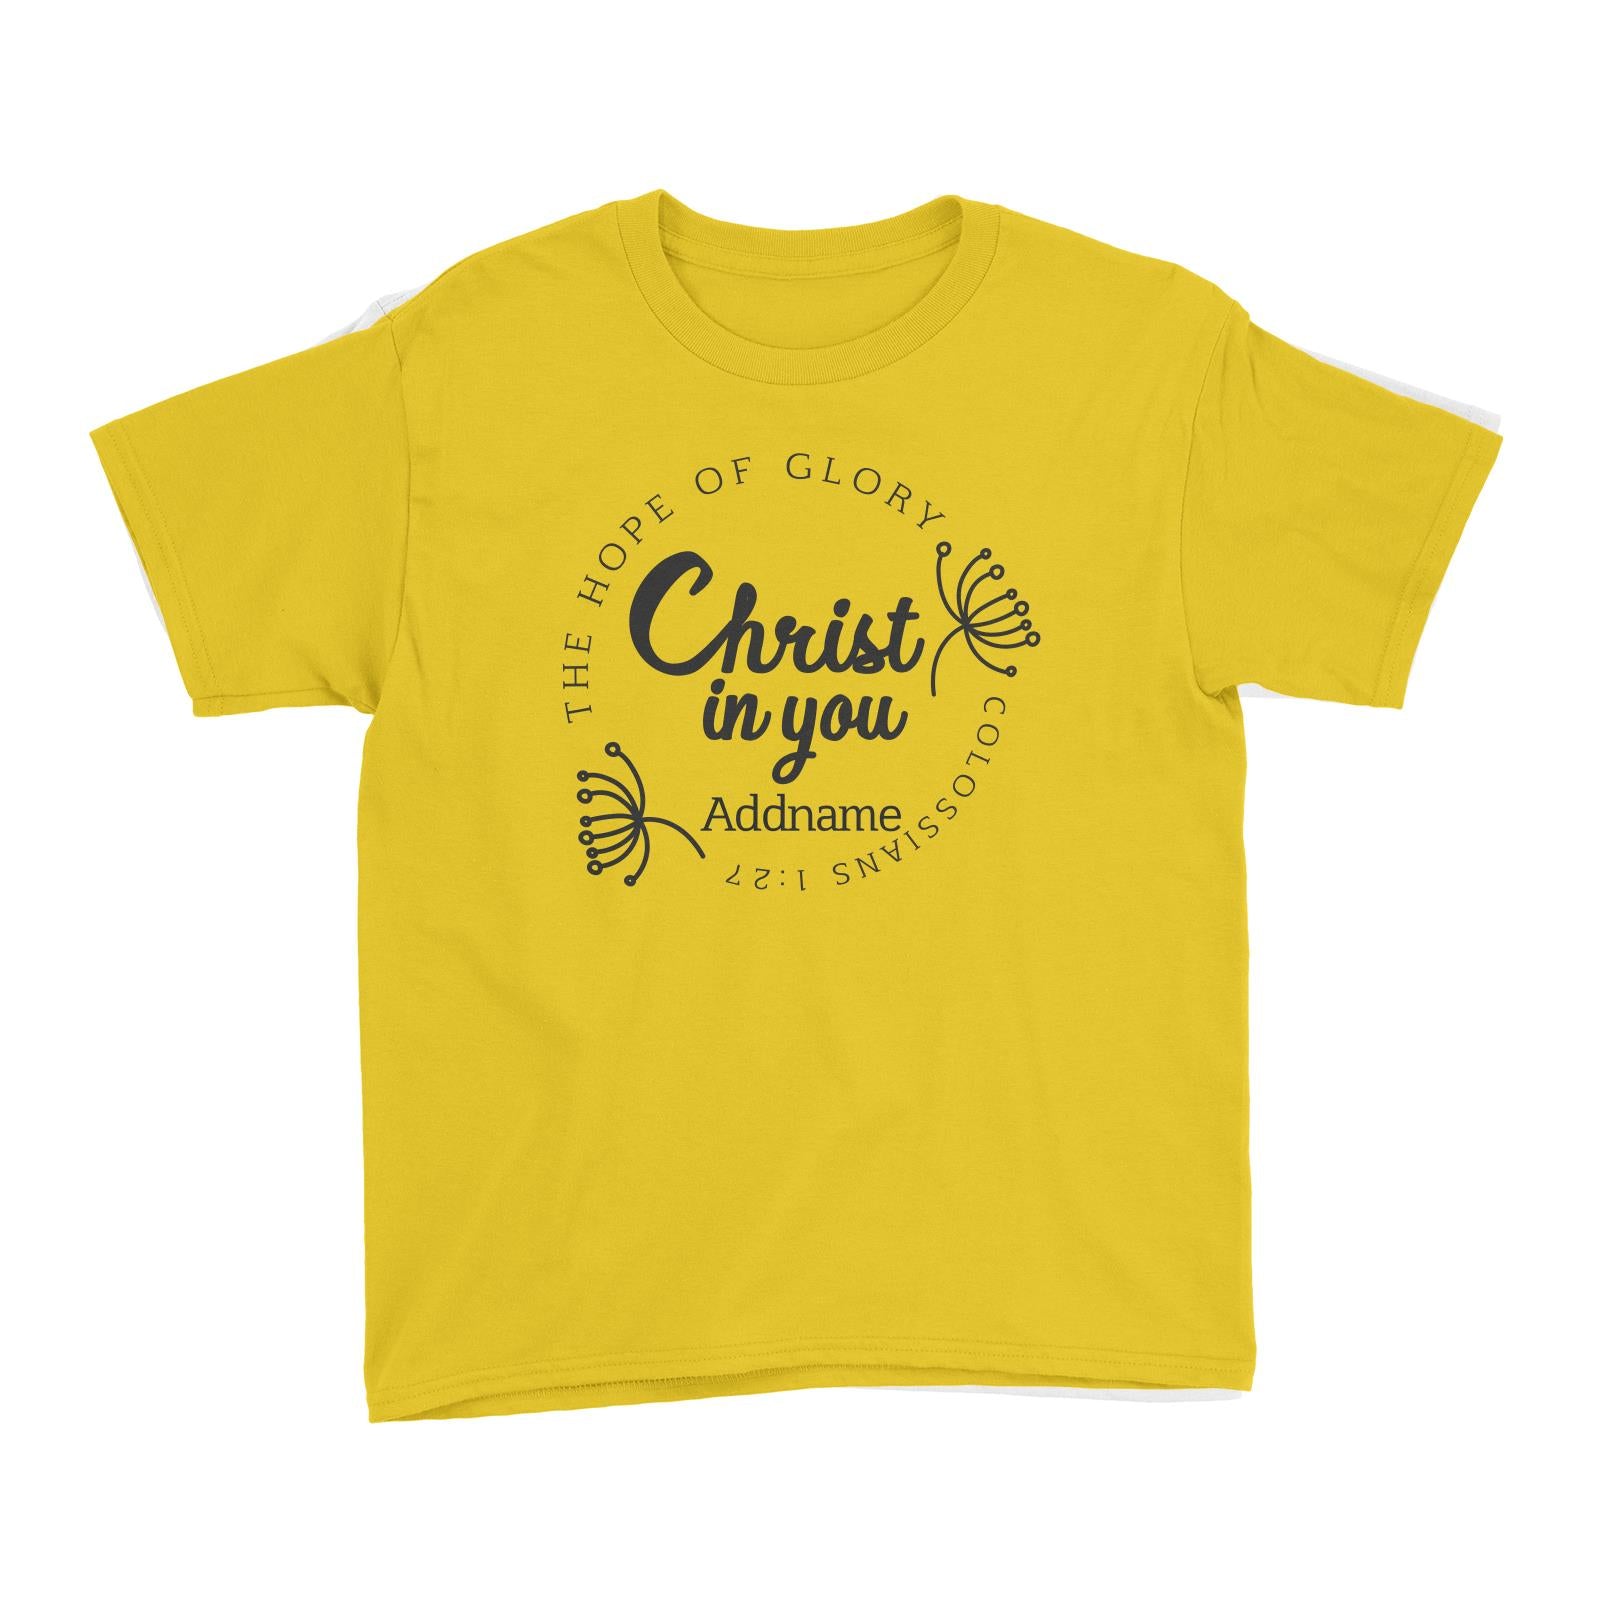 Christian Series The Hope Of Glory Christ In You Colossians 1.27 Addname Kid's T-Shirt